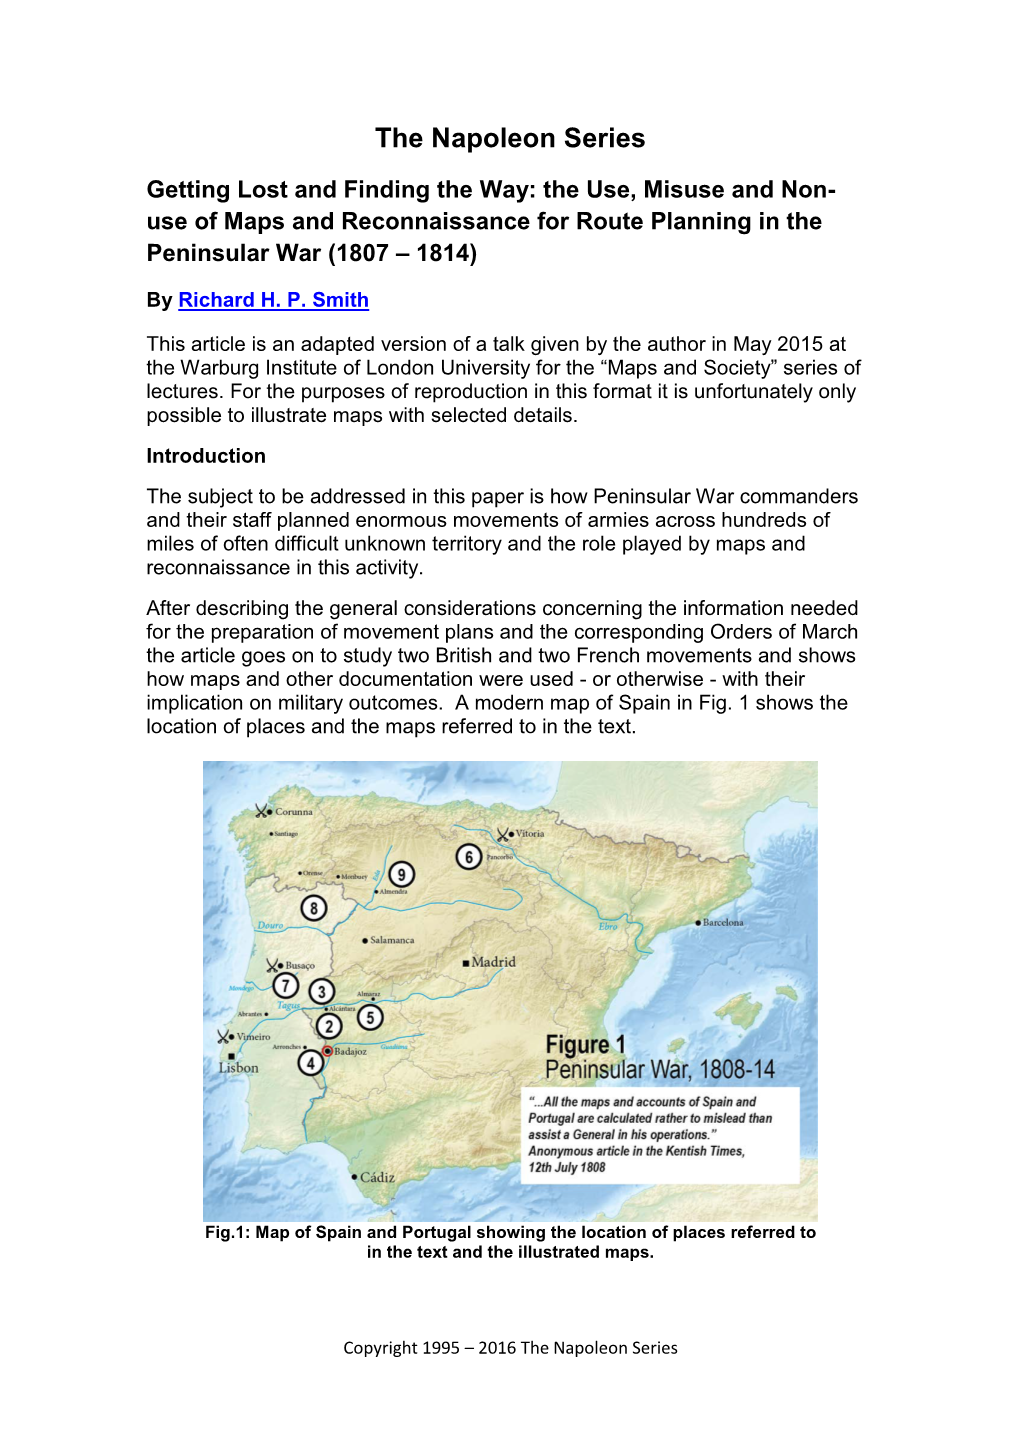 Getting Lost and Finding the Way: the Use, Misuse and Non- Use of Maps and Reconnaissance for Route Planning in the Peninsular War (1807 – 1814)